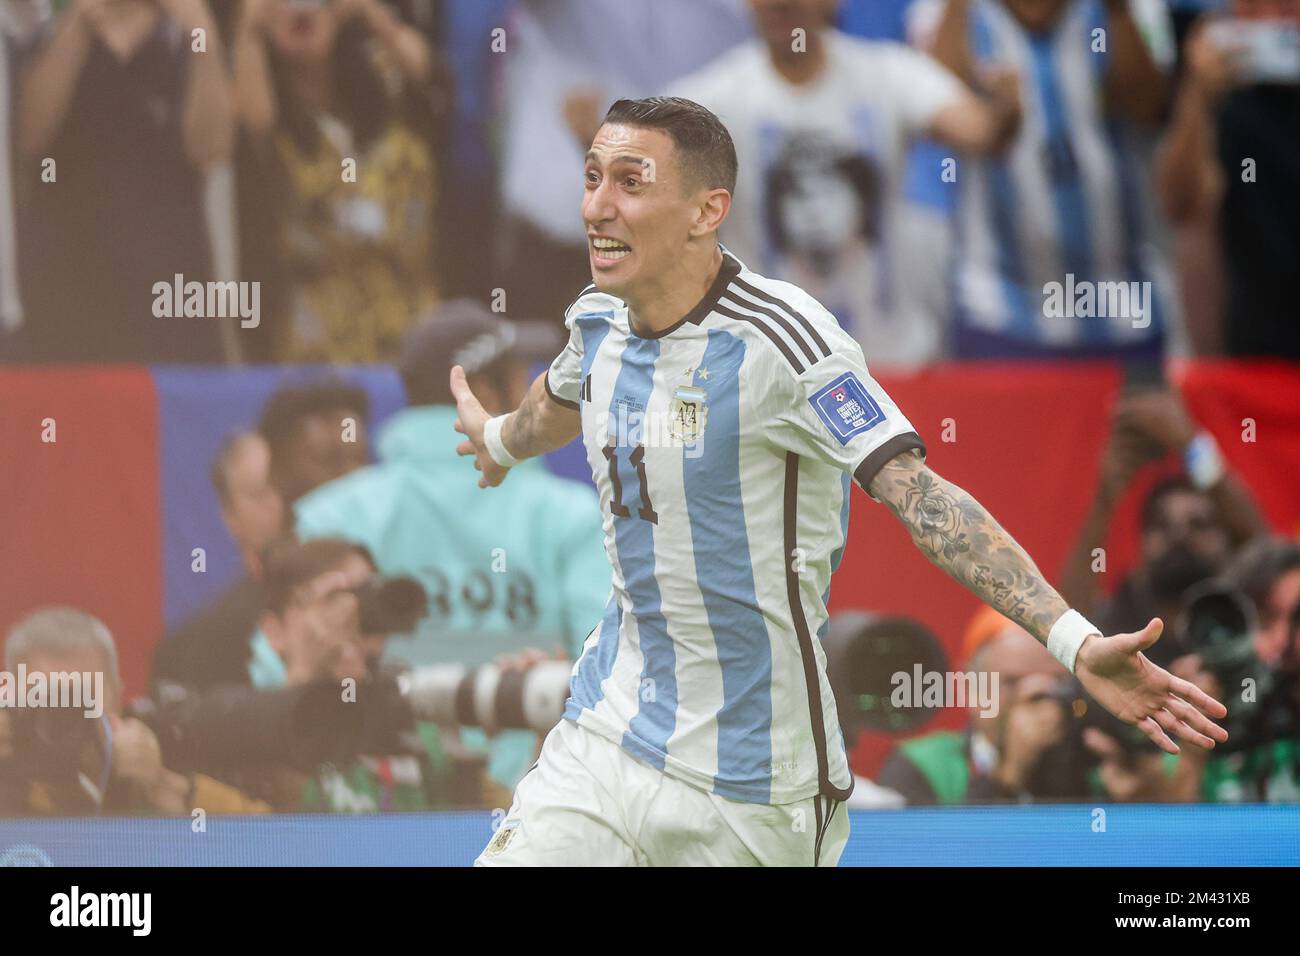 Doha, Qatar. 18th Dec, 2022. Ángel Di María Argentina player during a match against France valid for the Final World Cup in Qatar at Estadio Lusail in the city of Doha in Qatar. December 18, 2022. (Photo: William Volcov) Credit: Brazil Photo Press/Alamy Live News Stock Photo